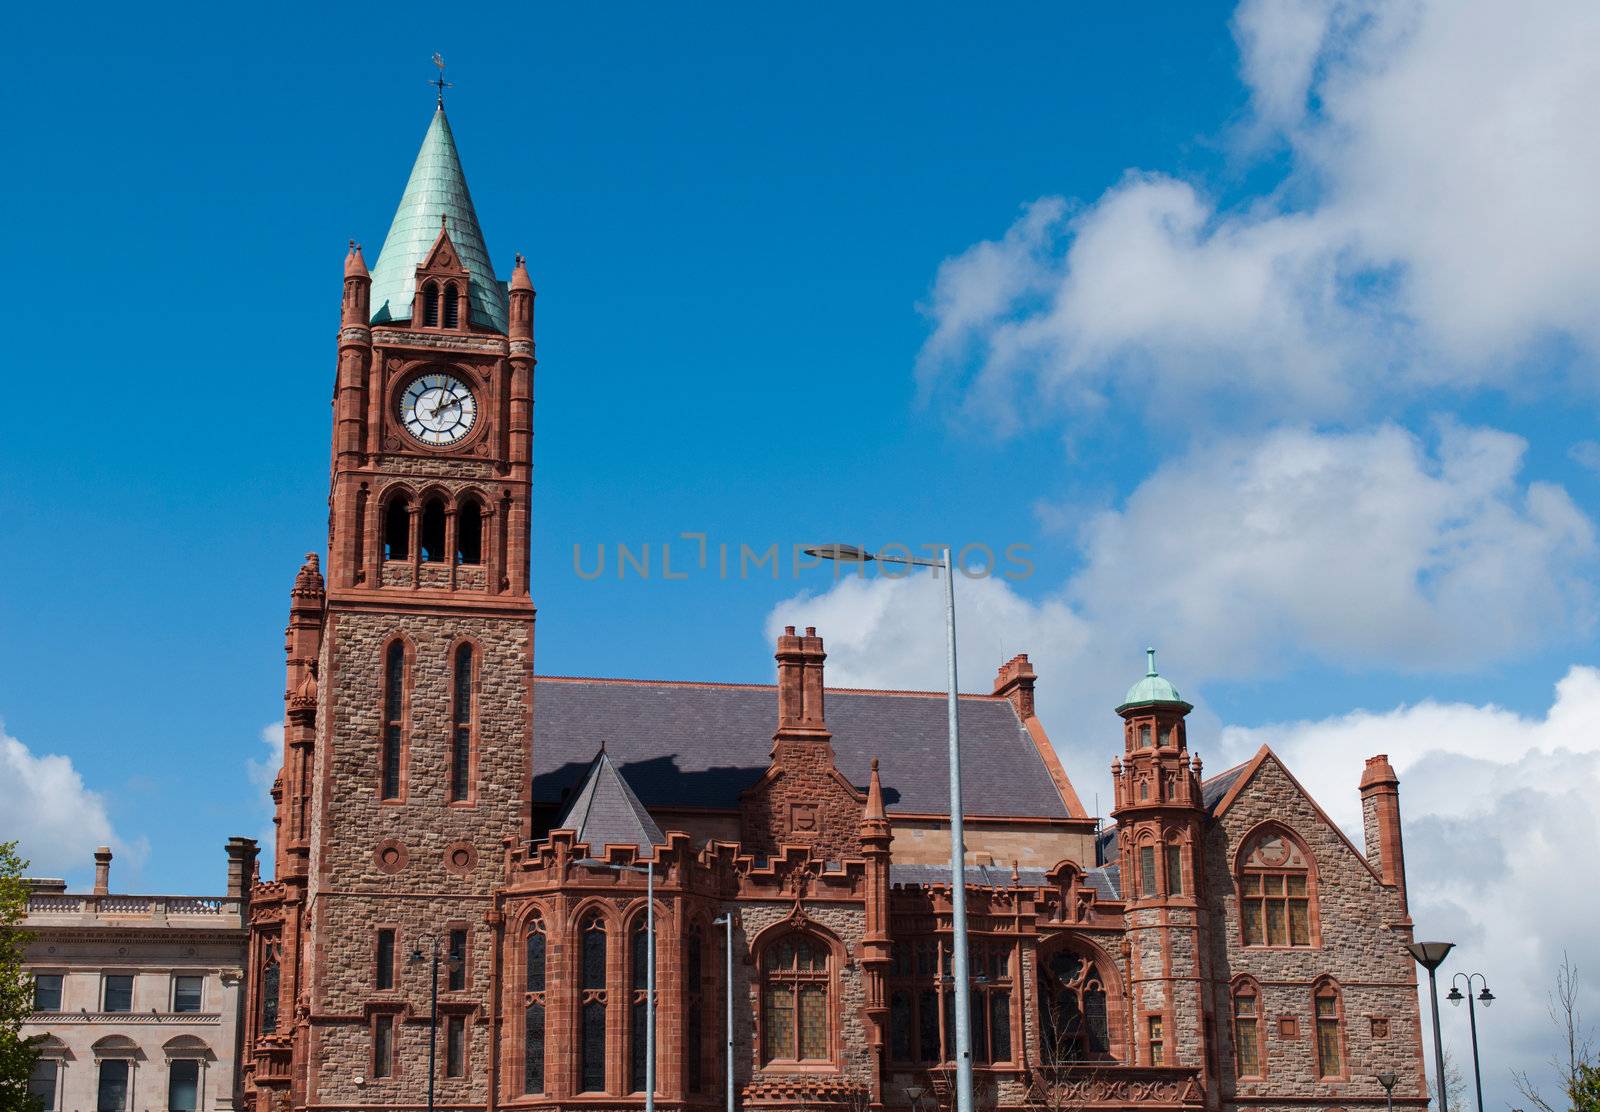 The Guildhall, neo-gothic building located at the main city square in Londonderry, Northern Ireland  